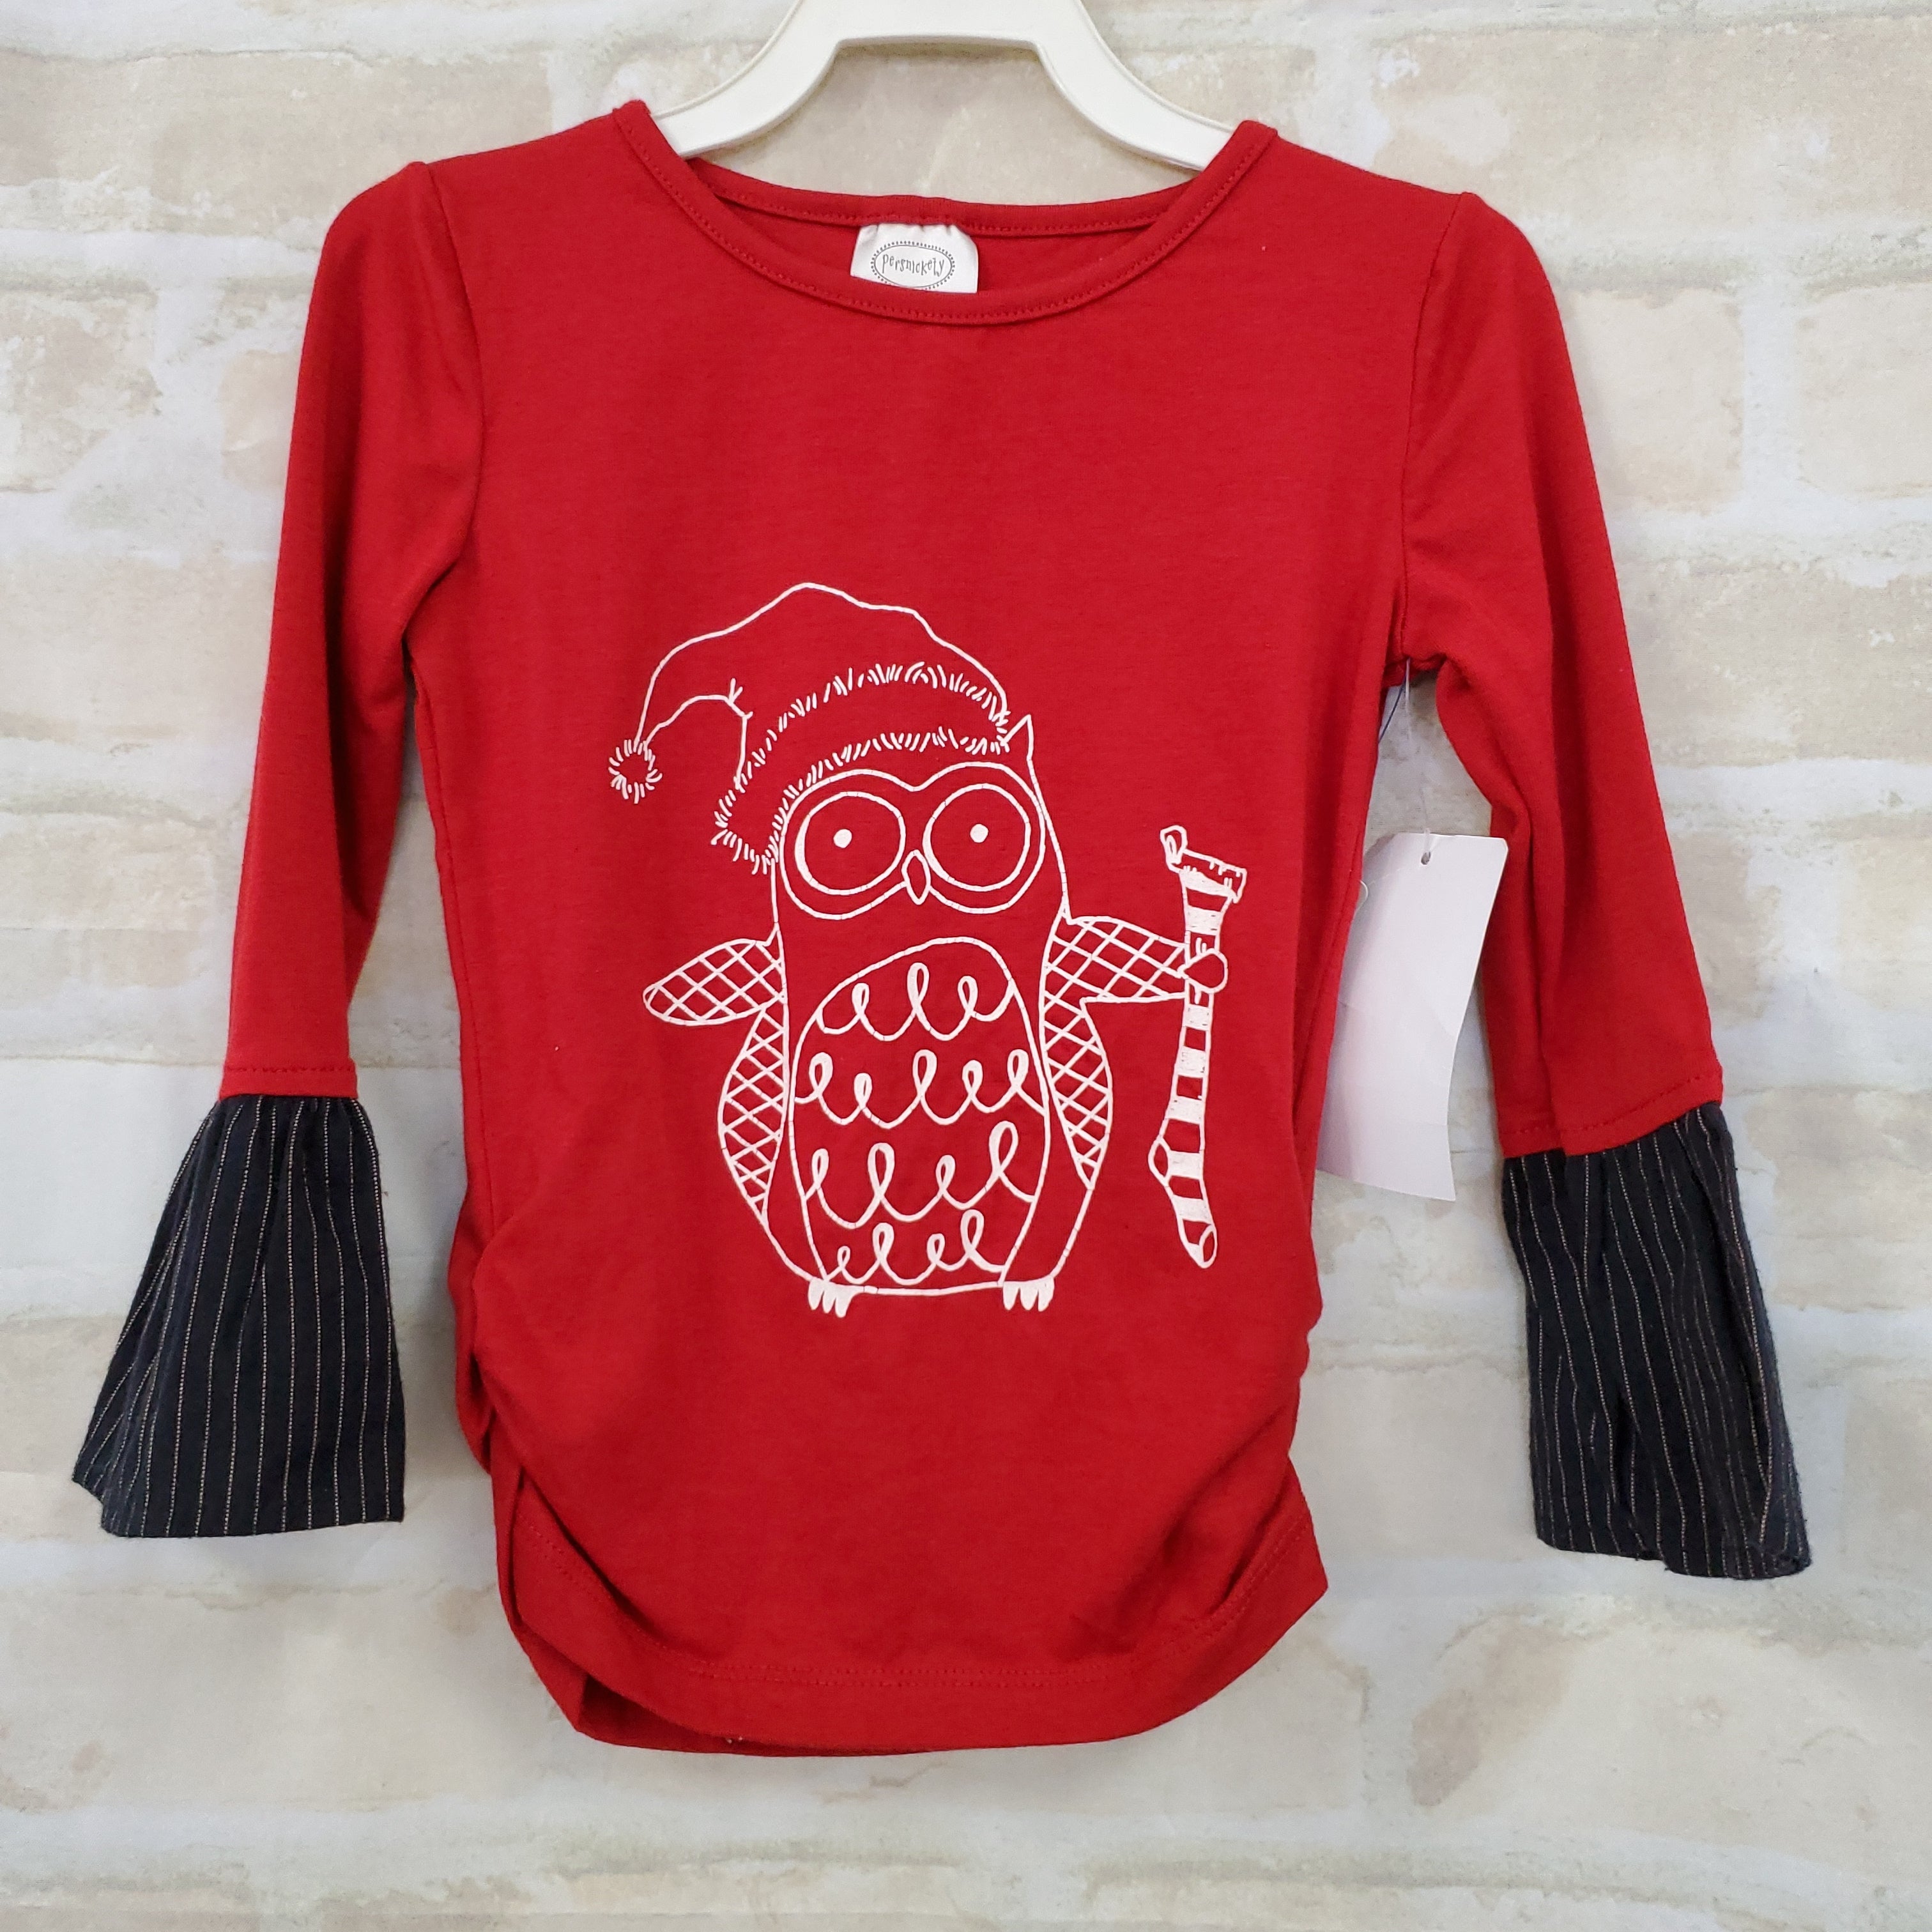 Persnickety girls top New red L/S 3T